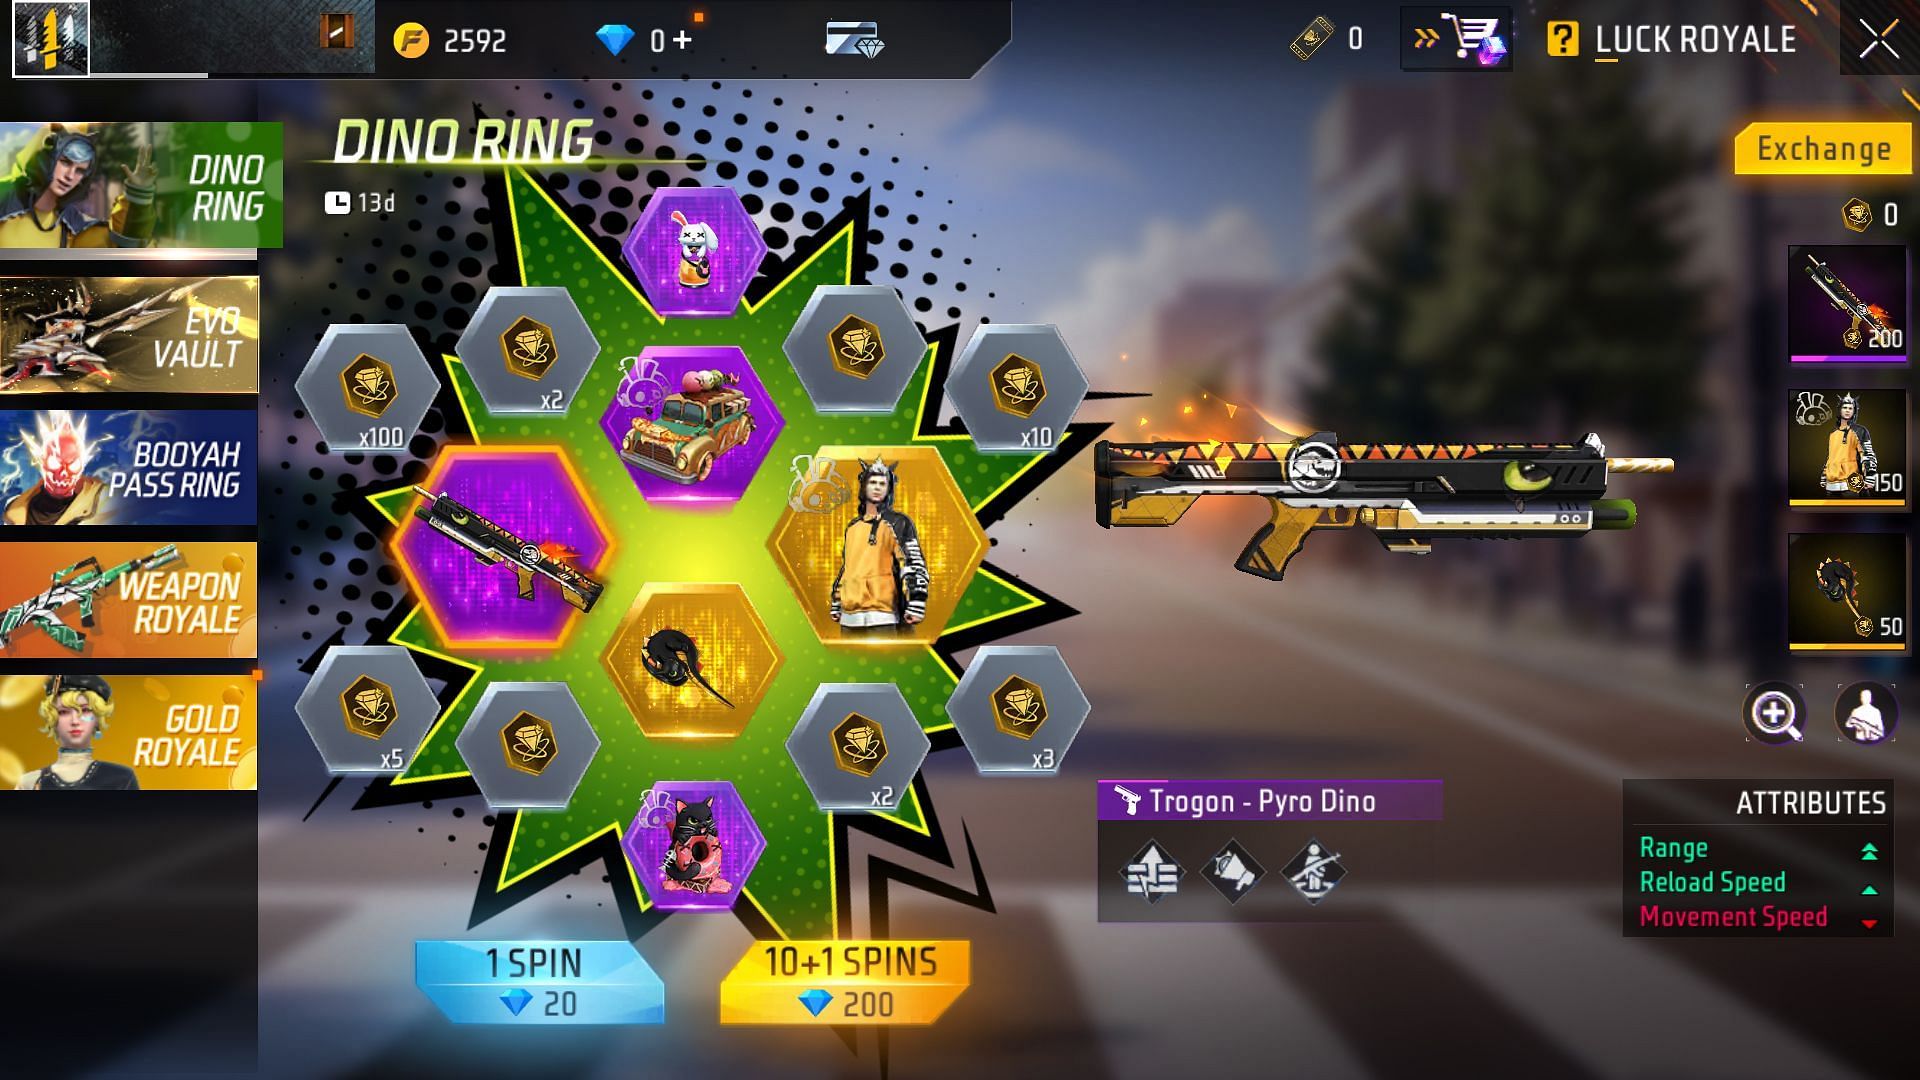 NEW BOOYAH PASS RING EVENT FREE FIRE